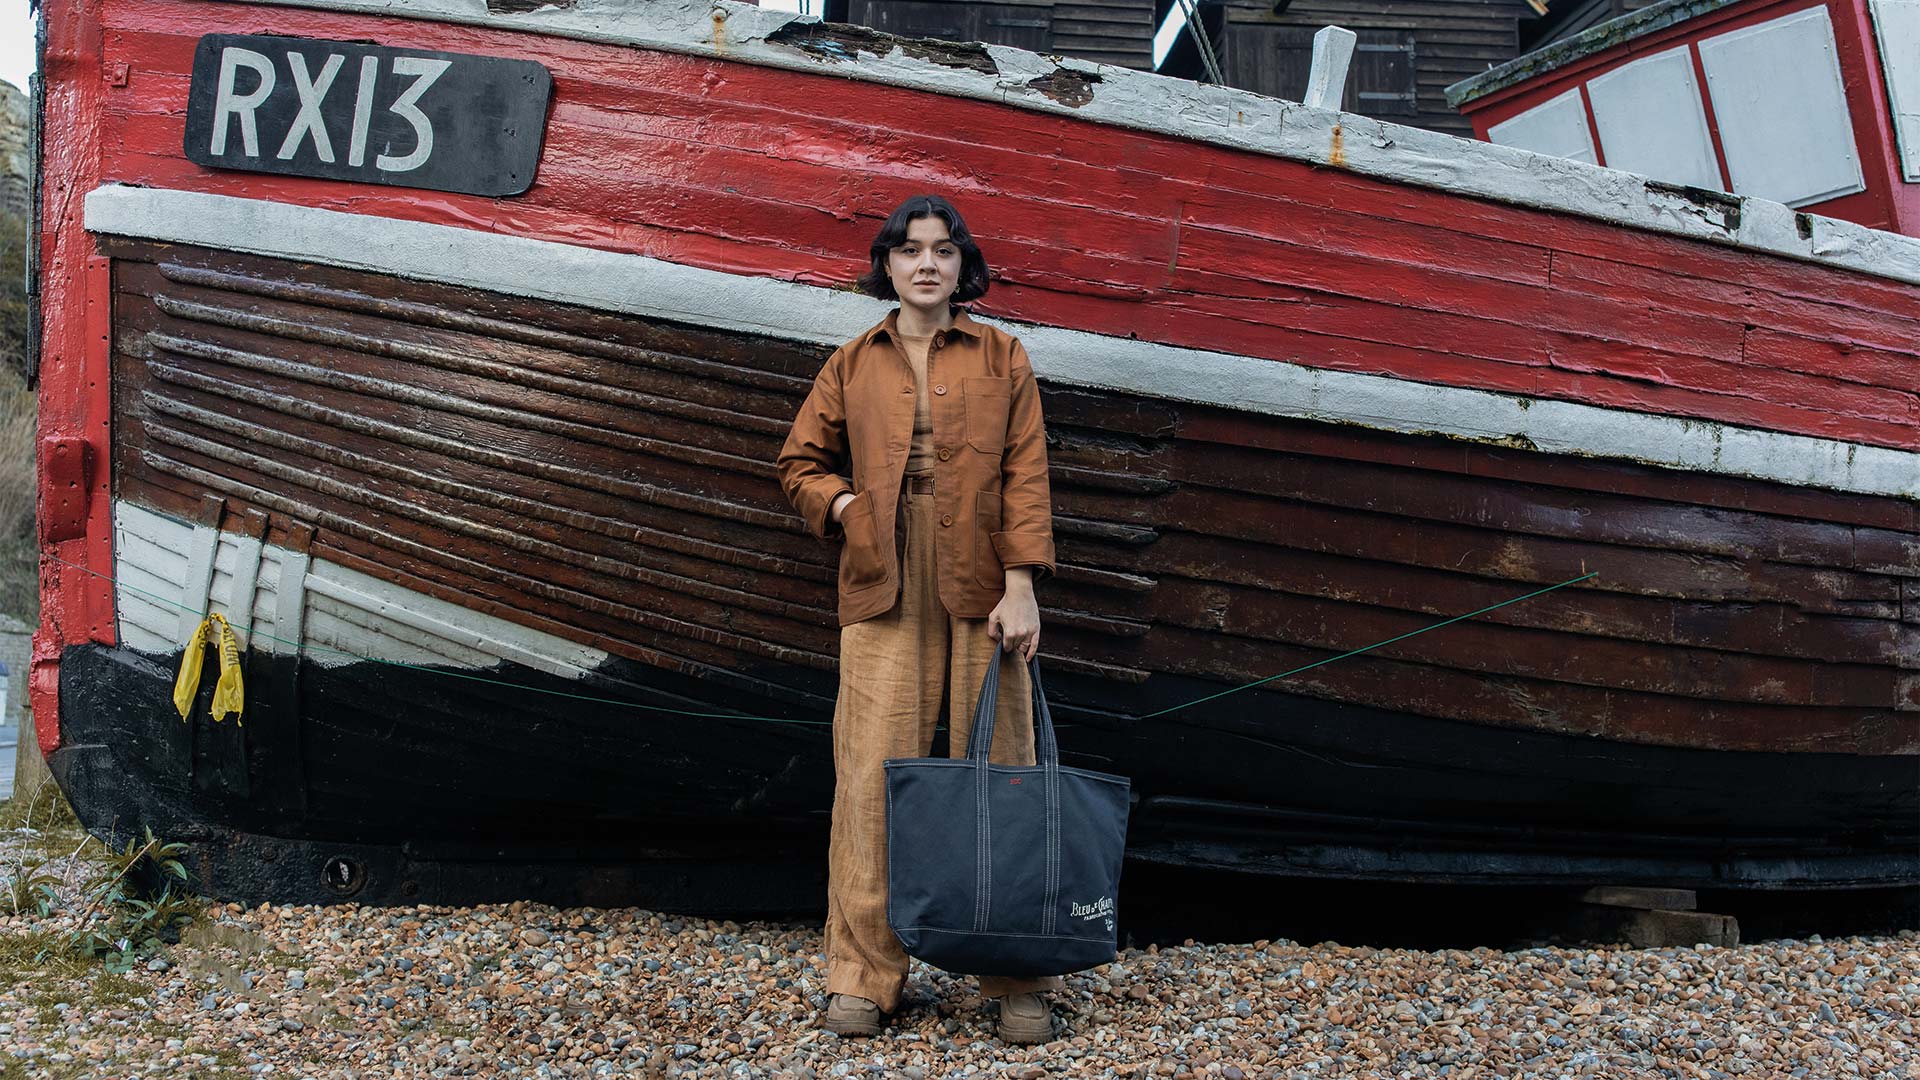 A woman wears a Labor Day shopping bag in front of a shipwreck